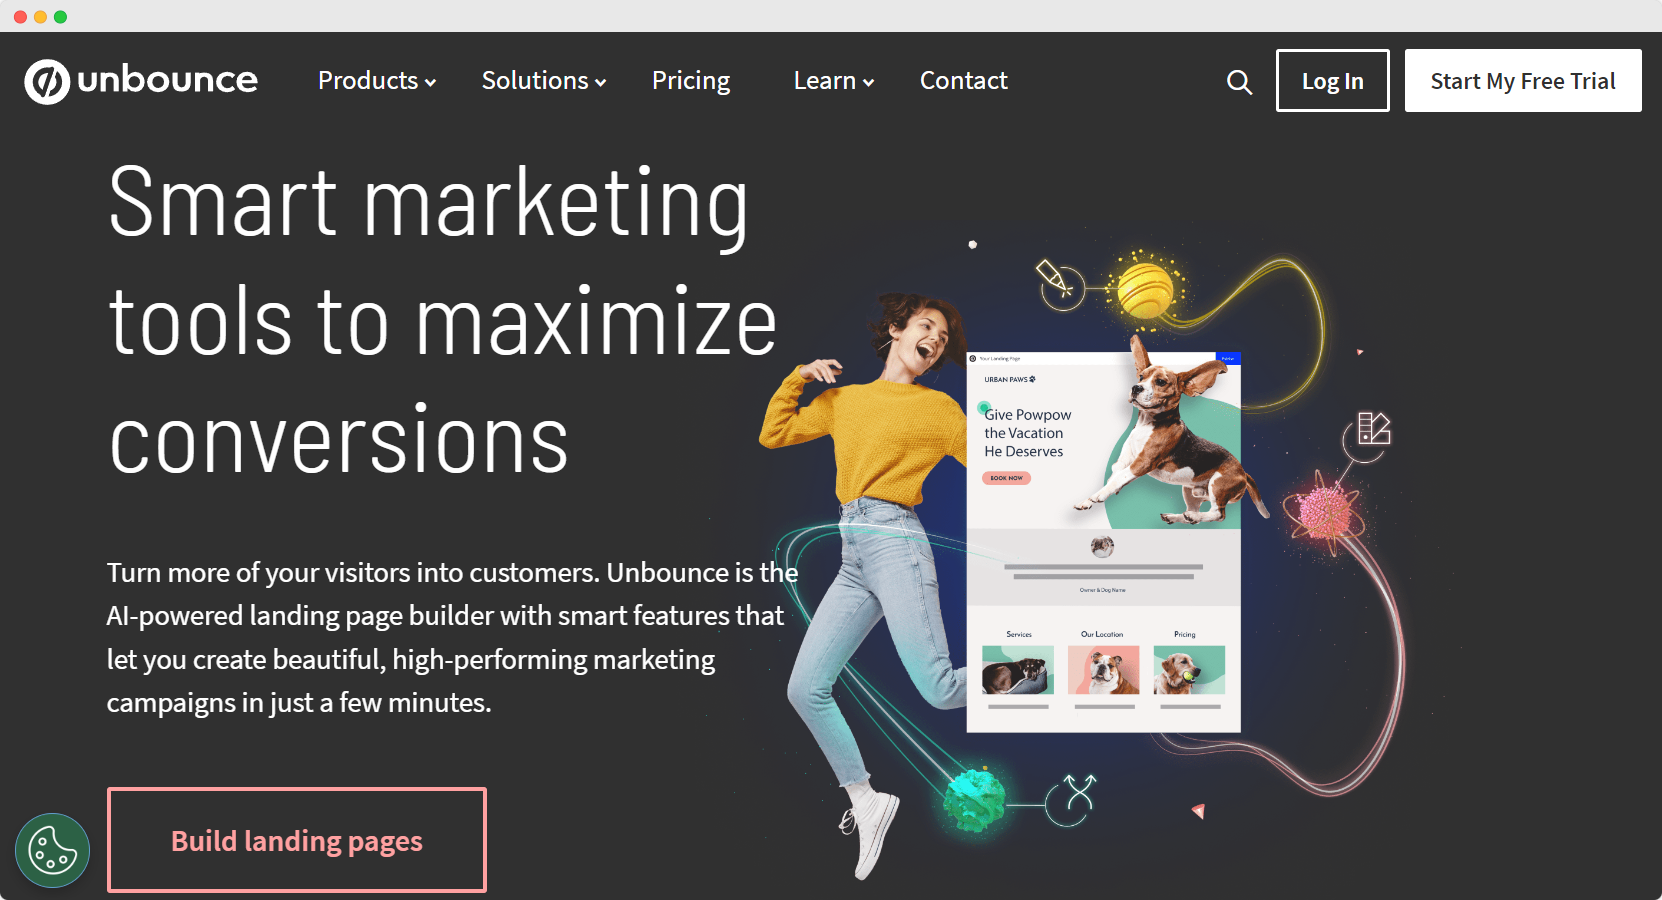 Unbounce marketing tool